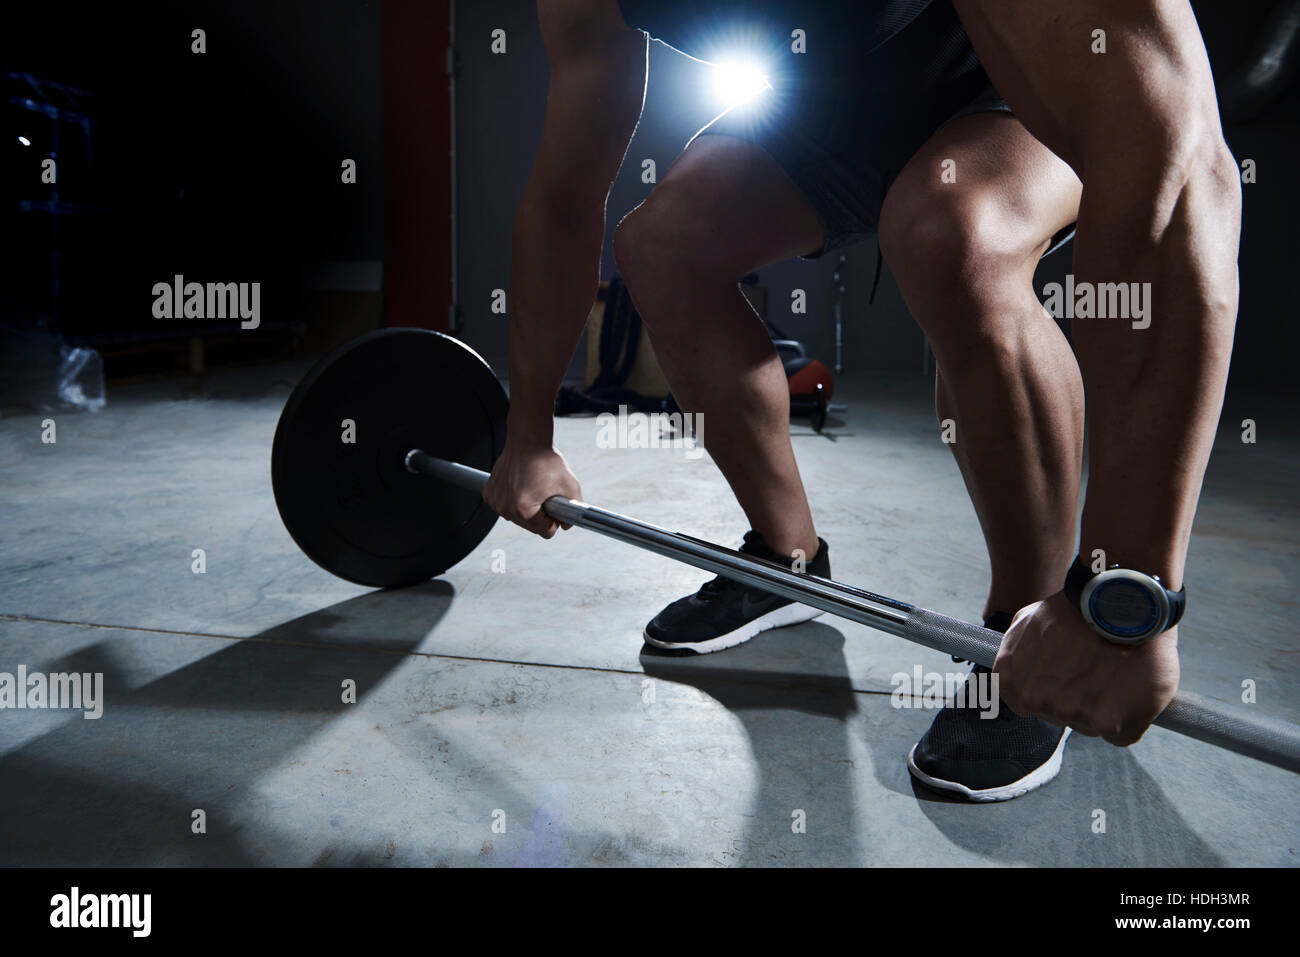 Dead lift made by athlete man Stock Photo